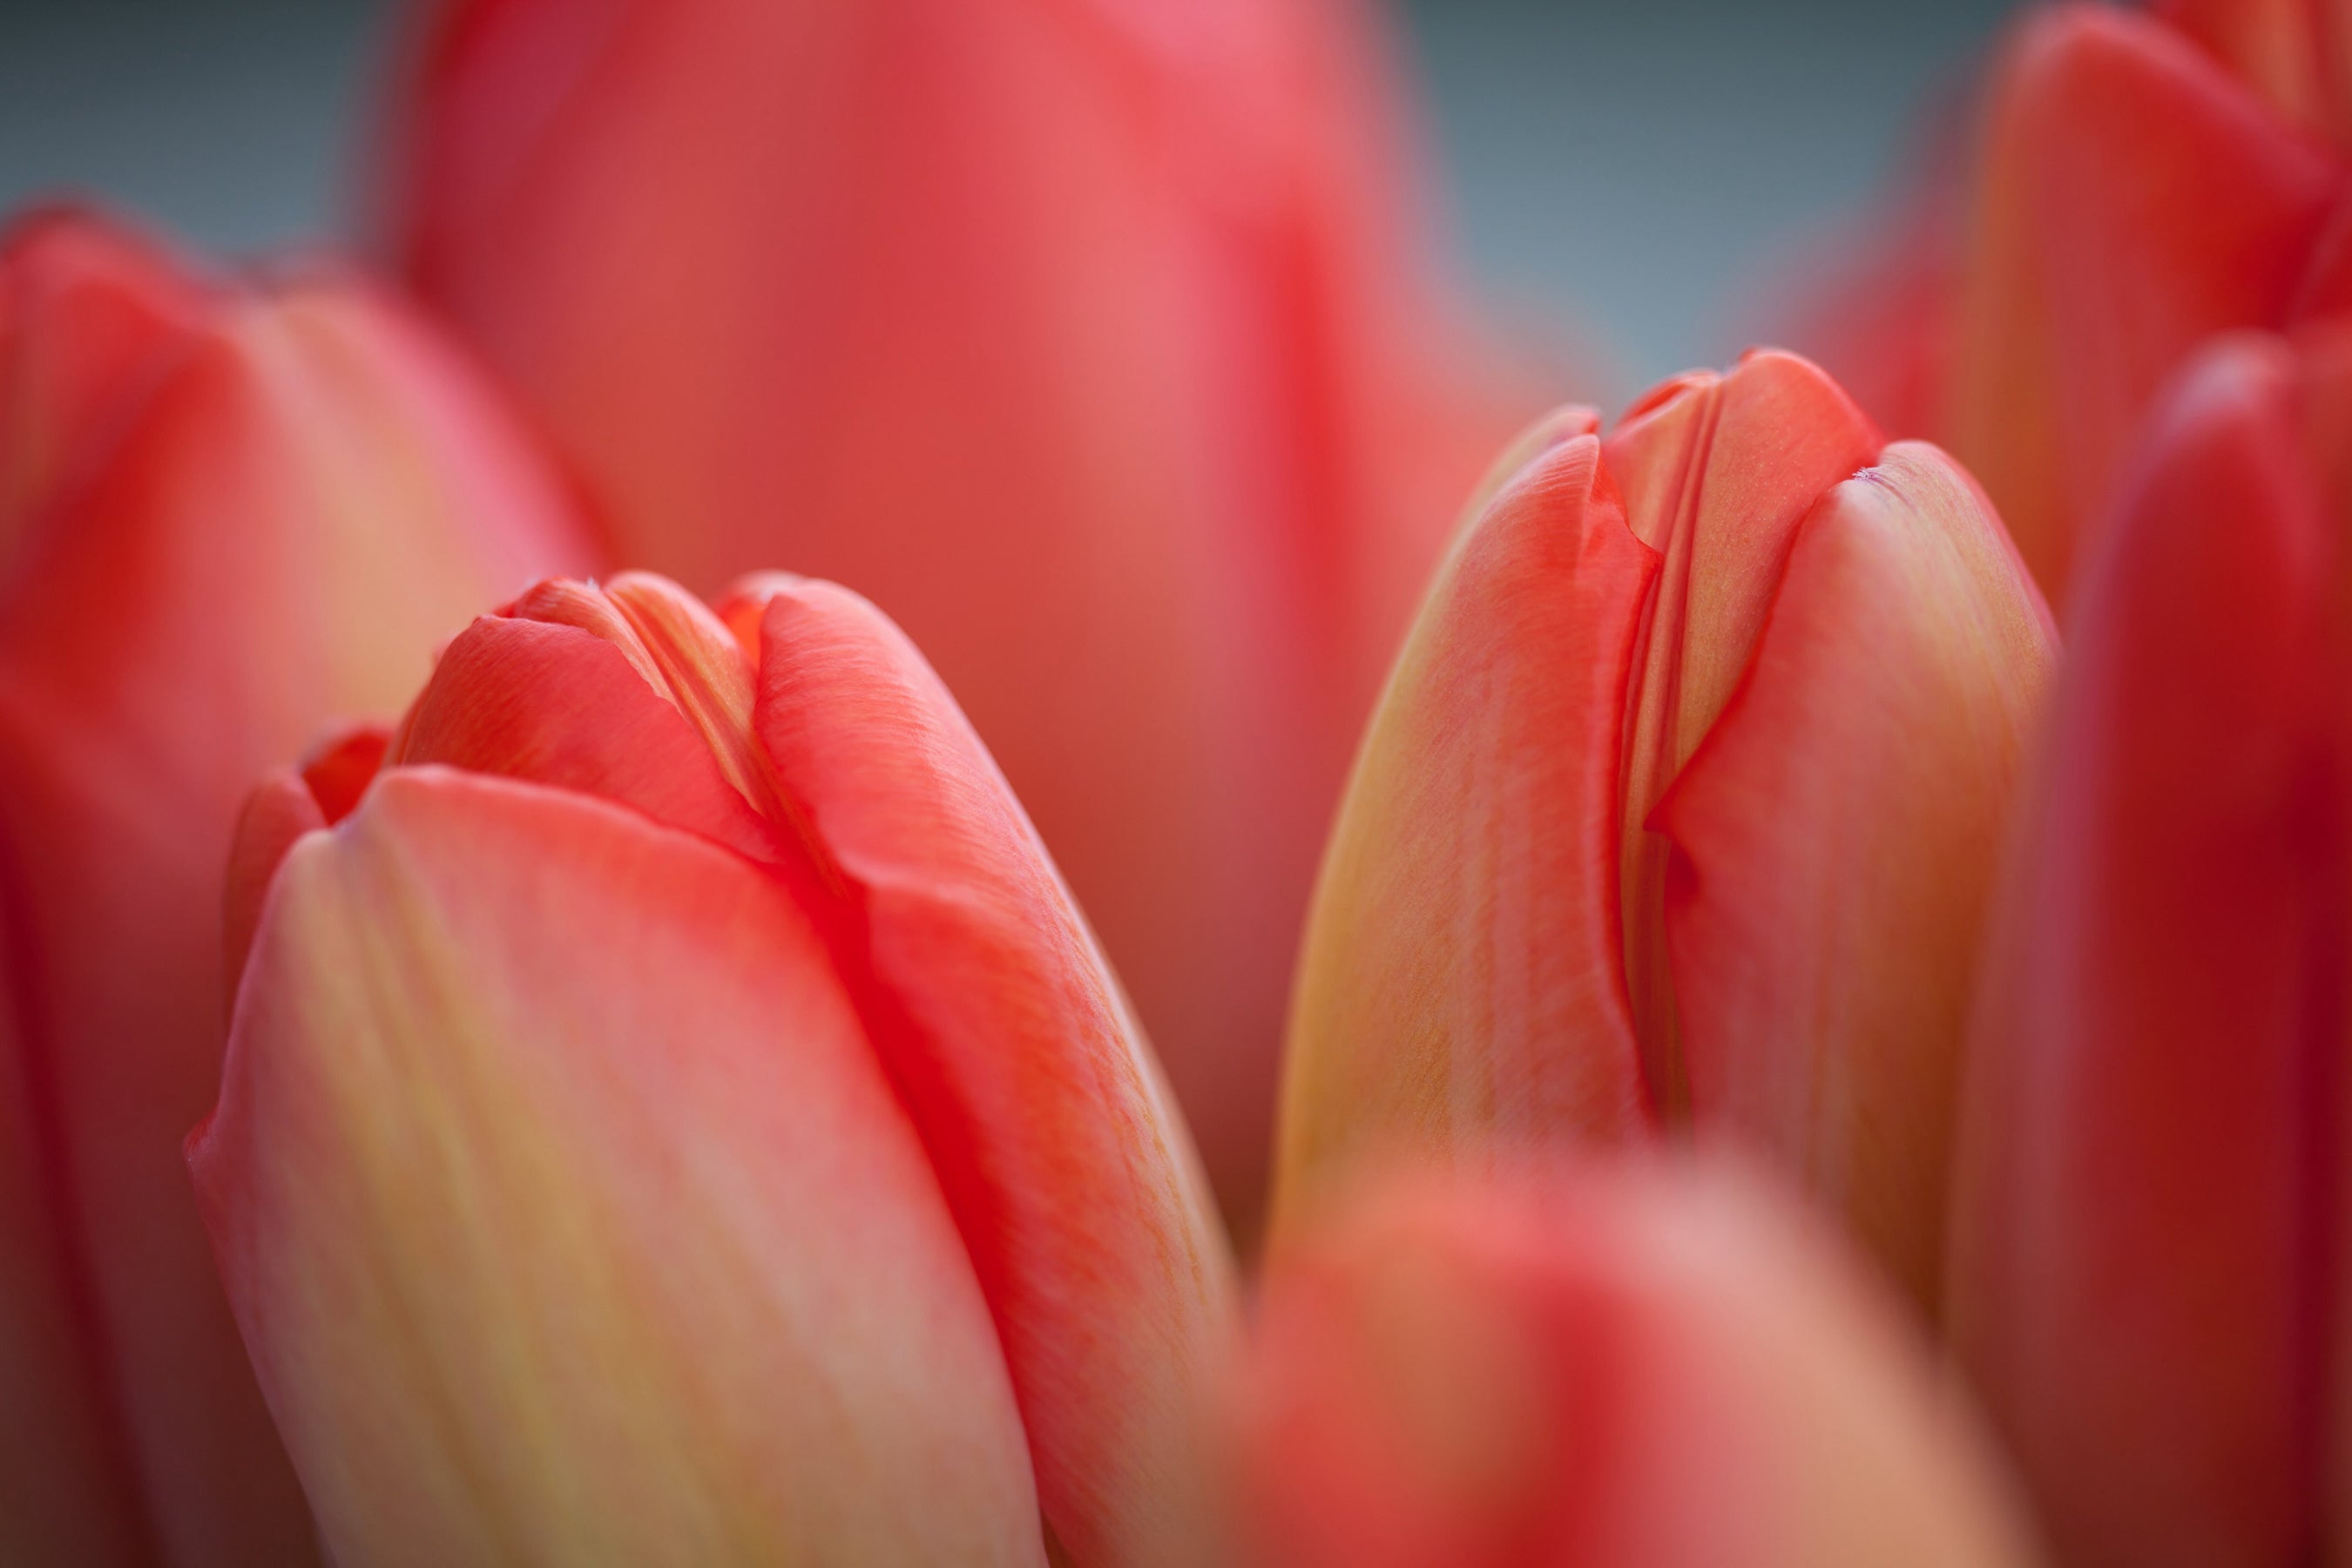 Red orange tulips close up cremation urn reference